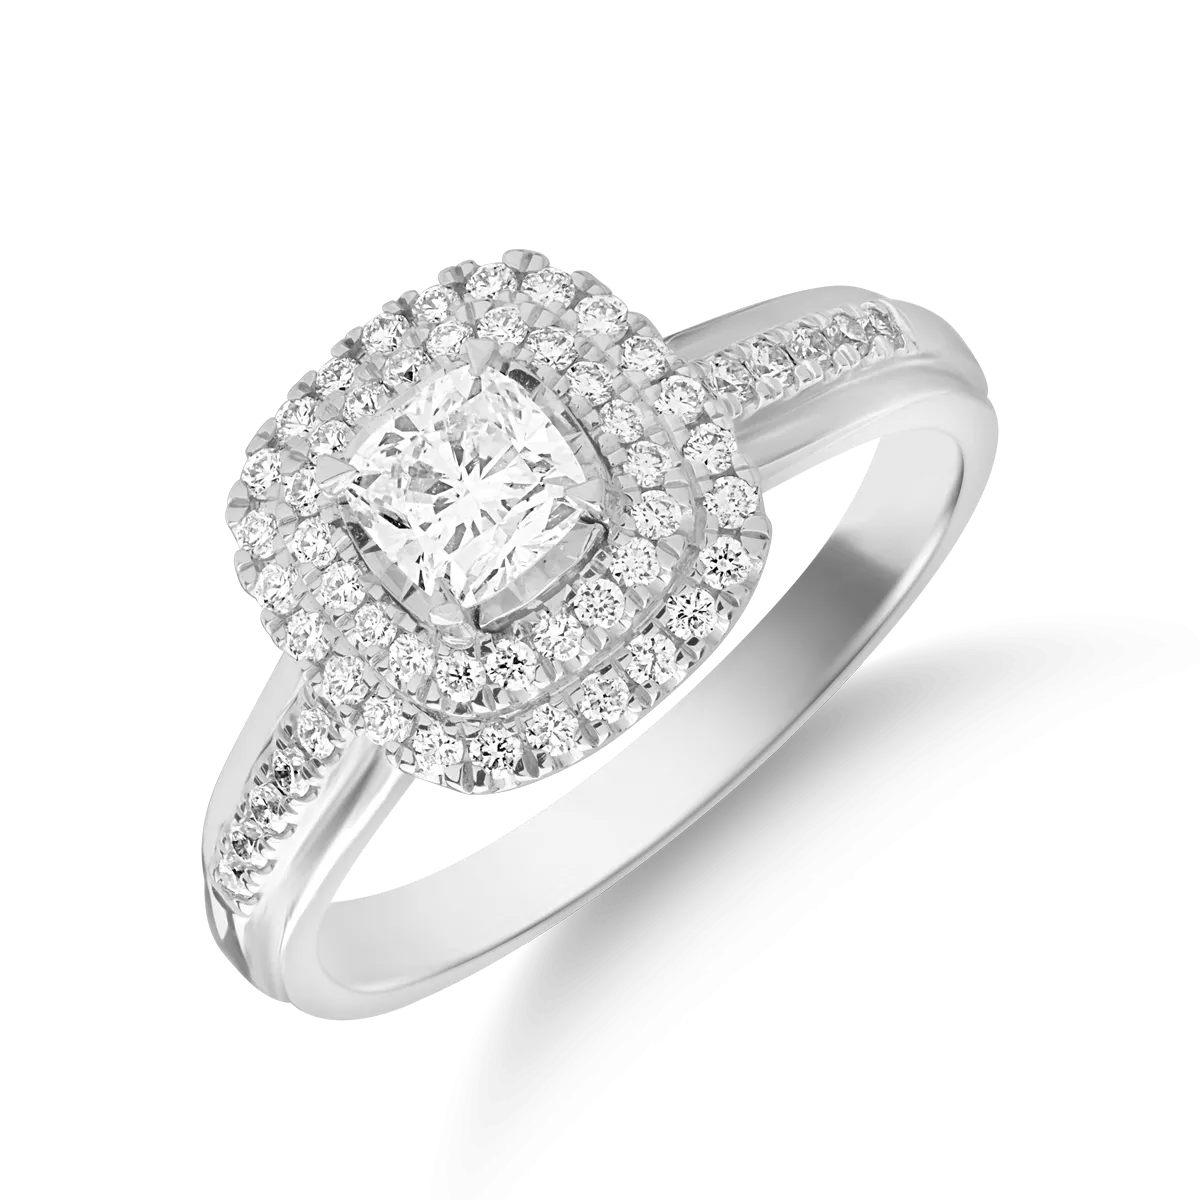 18K white gold ring with 0.31ct diamond and 0.22ct diamonds